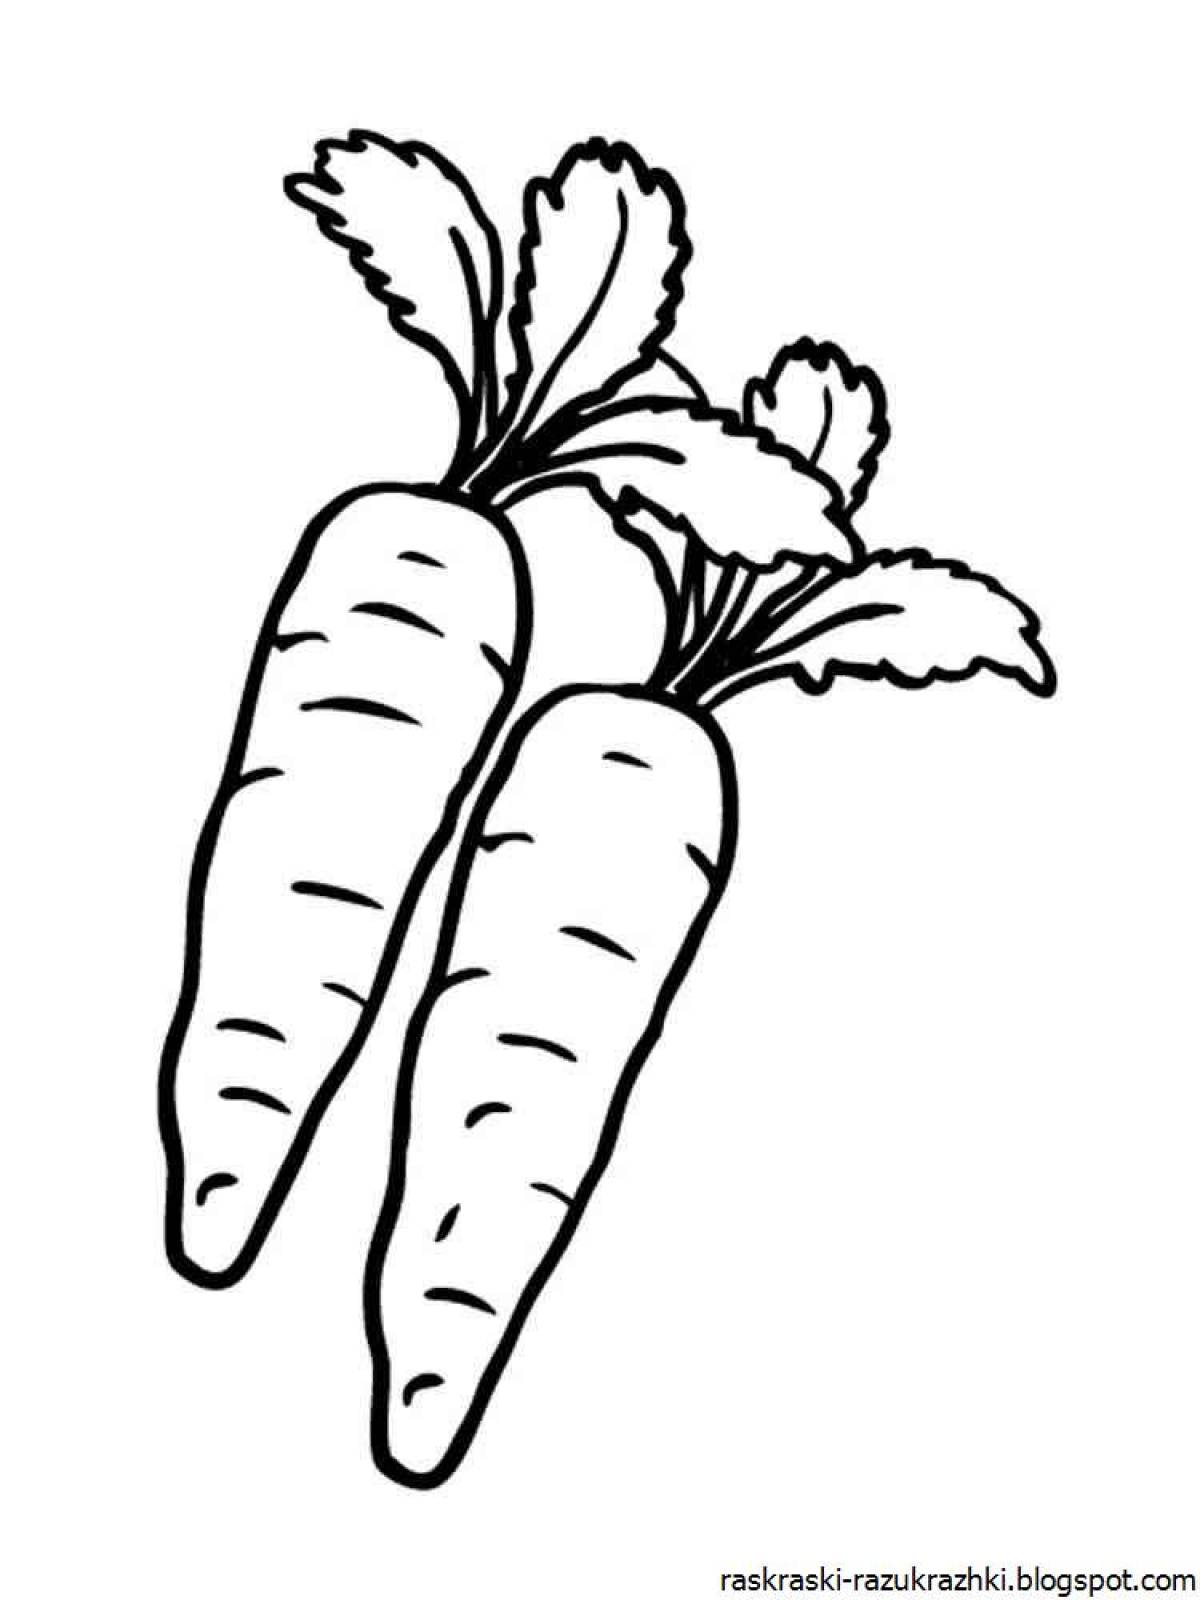 Bright carrot coloring page